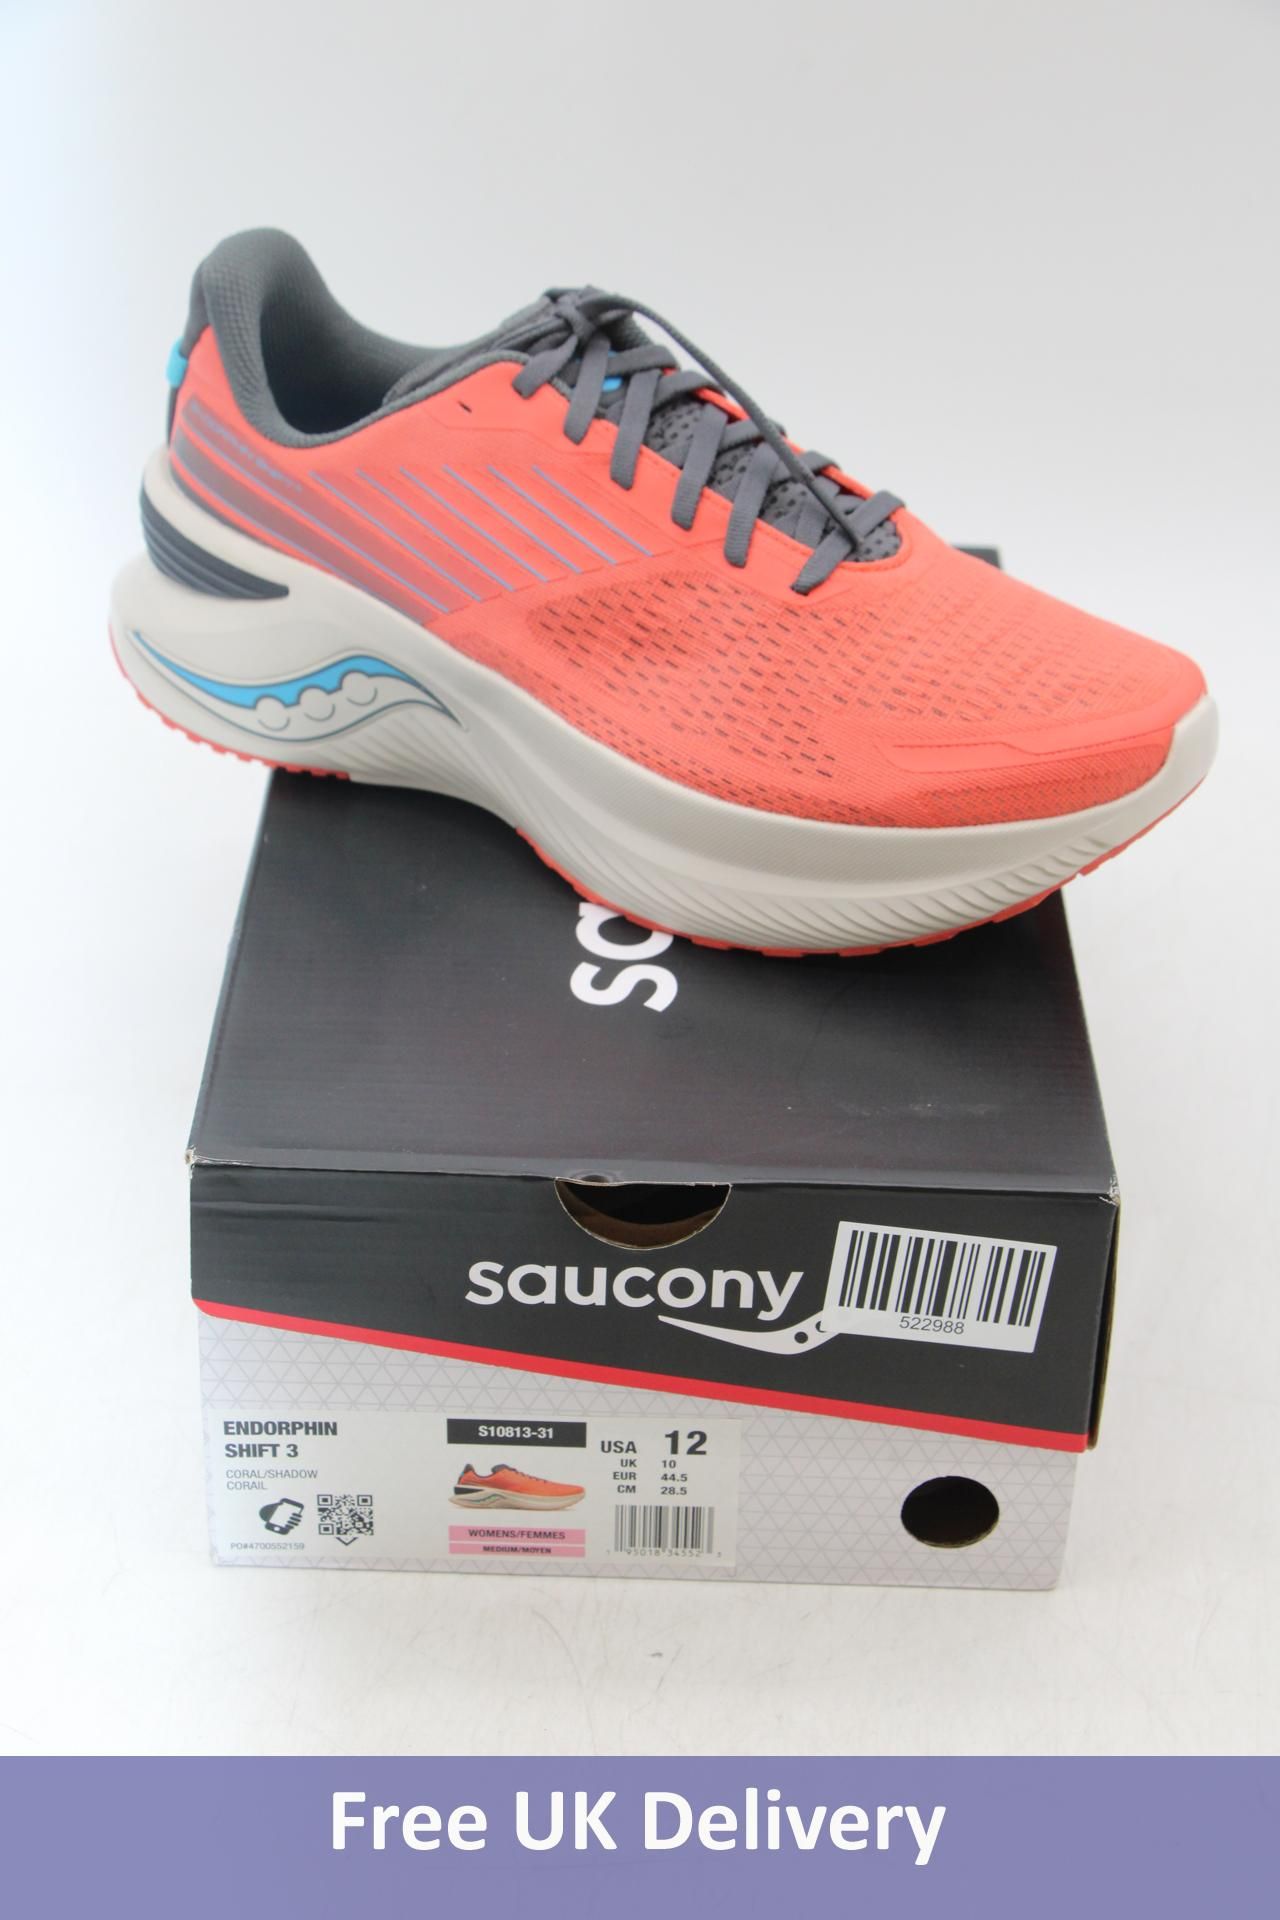 Saucony Endorphin Shift 3 Trainers, Coral/Shadow, UK 10